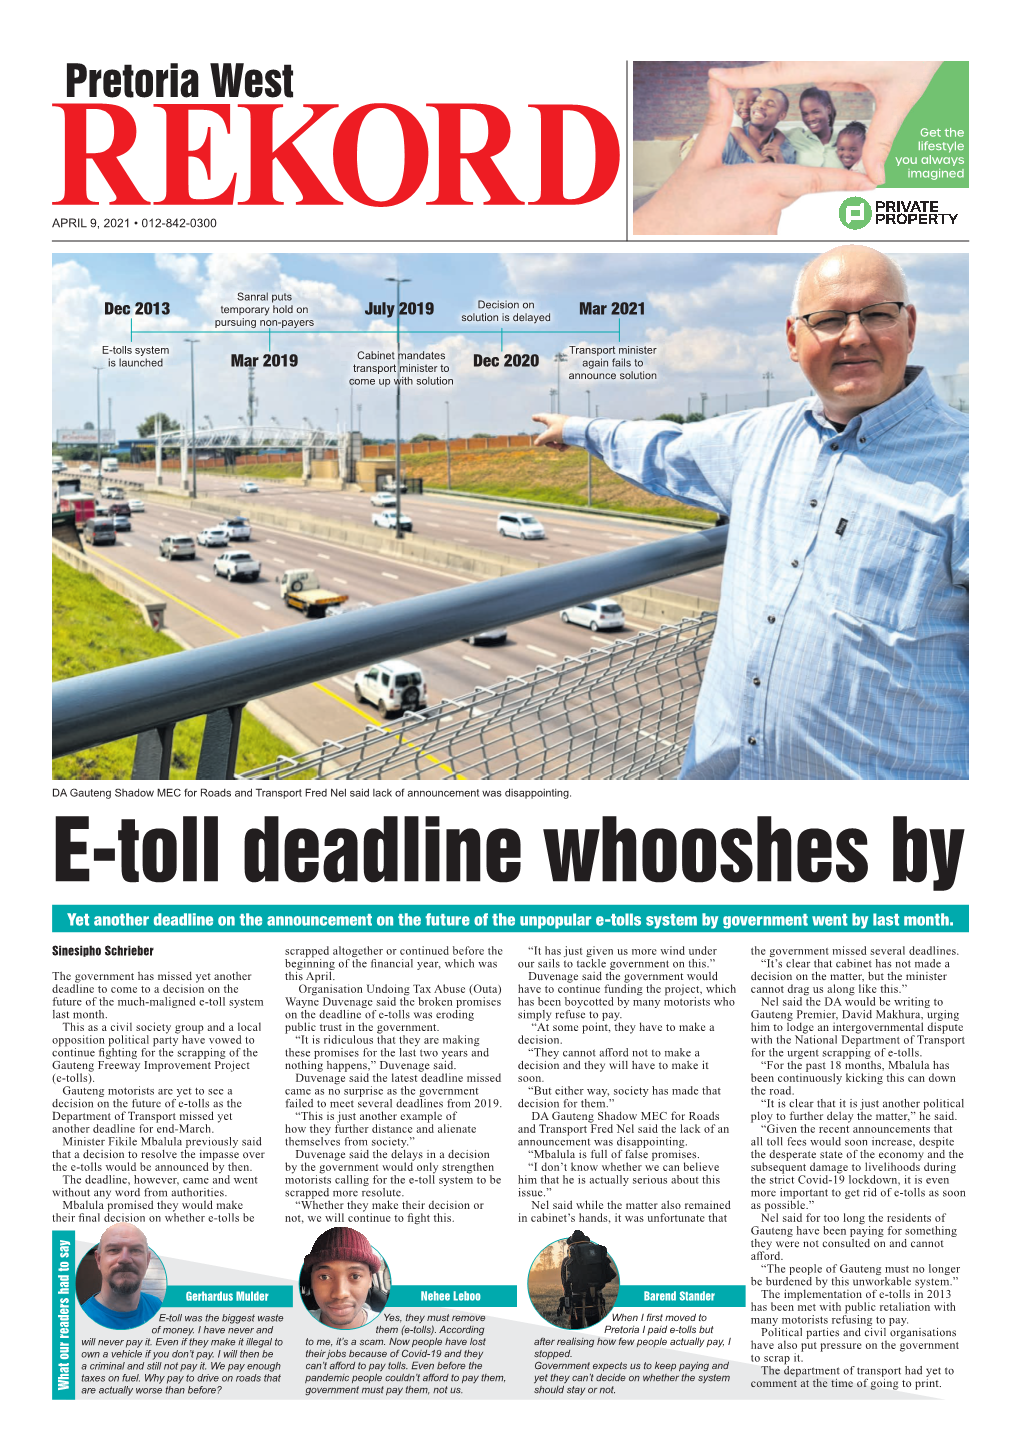 E-Toll Deadline Whooshes by Yet Another Deadline on the Announcement on the Future of the Unpopular E-Tolls System by Government Went by Last Month